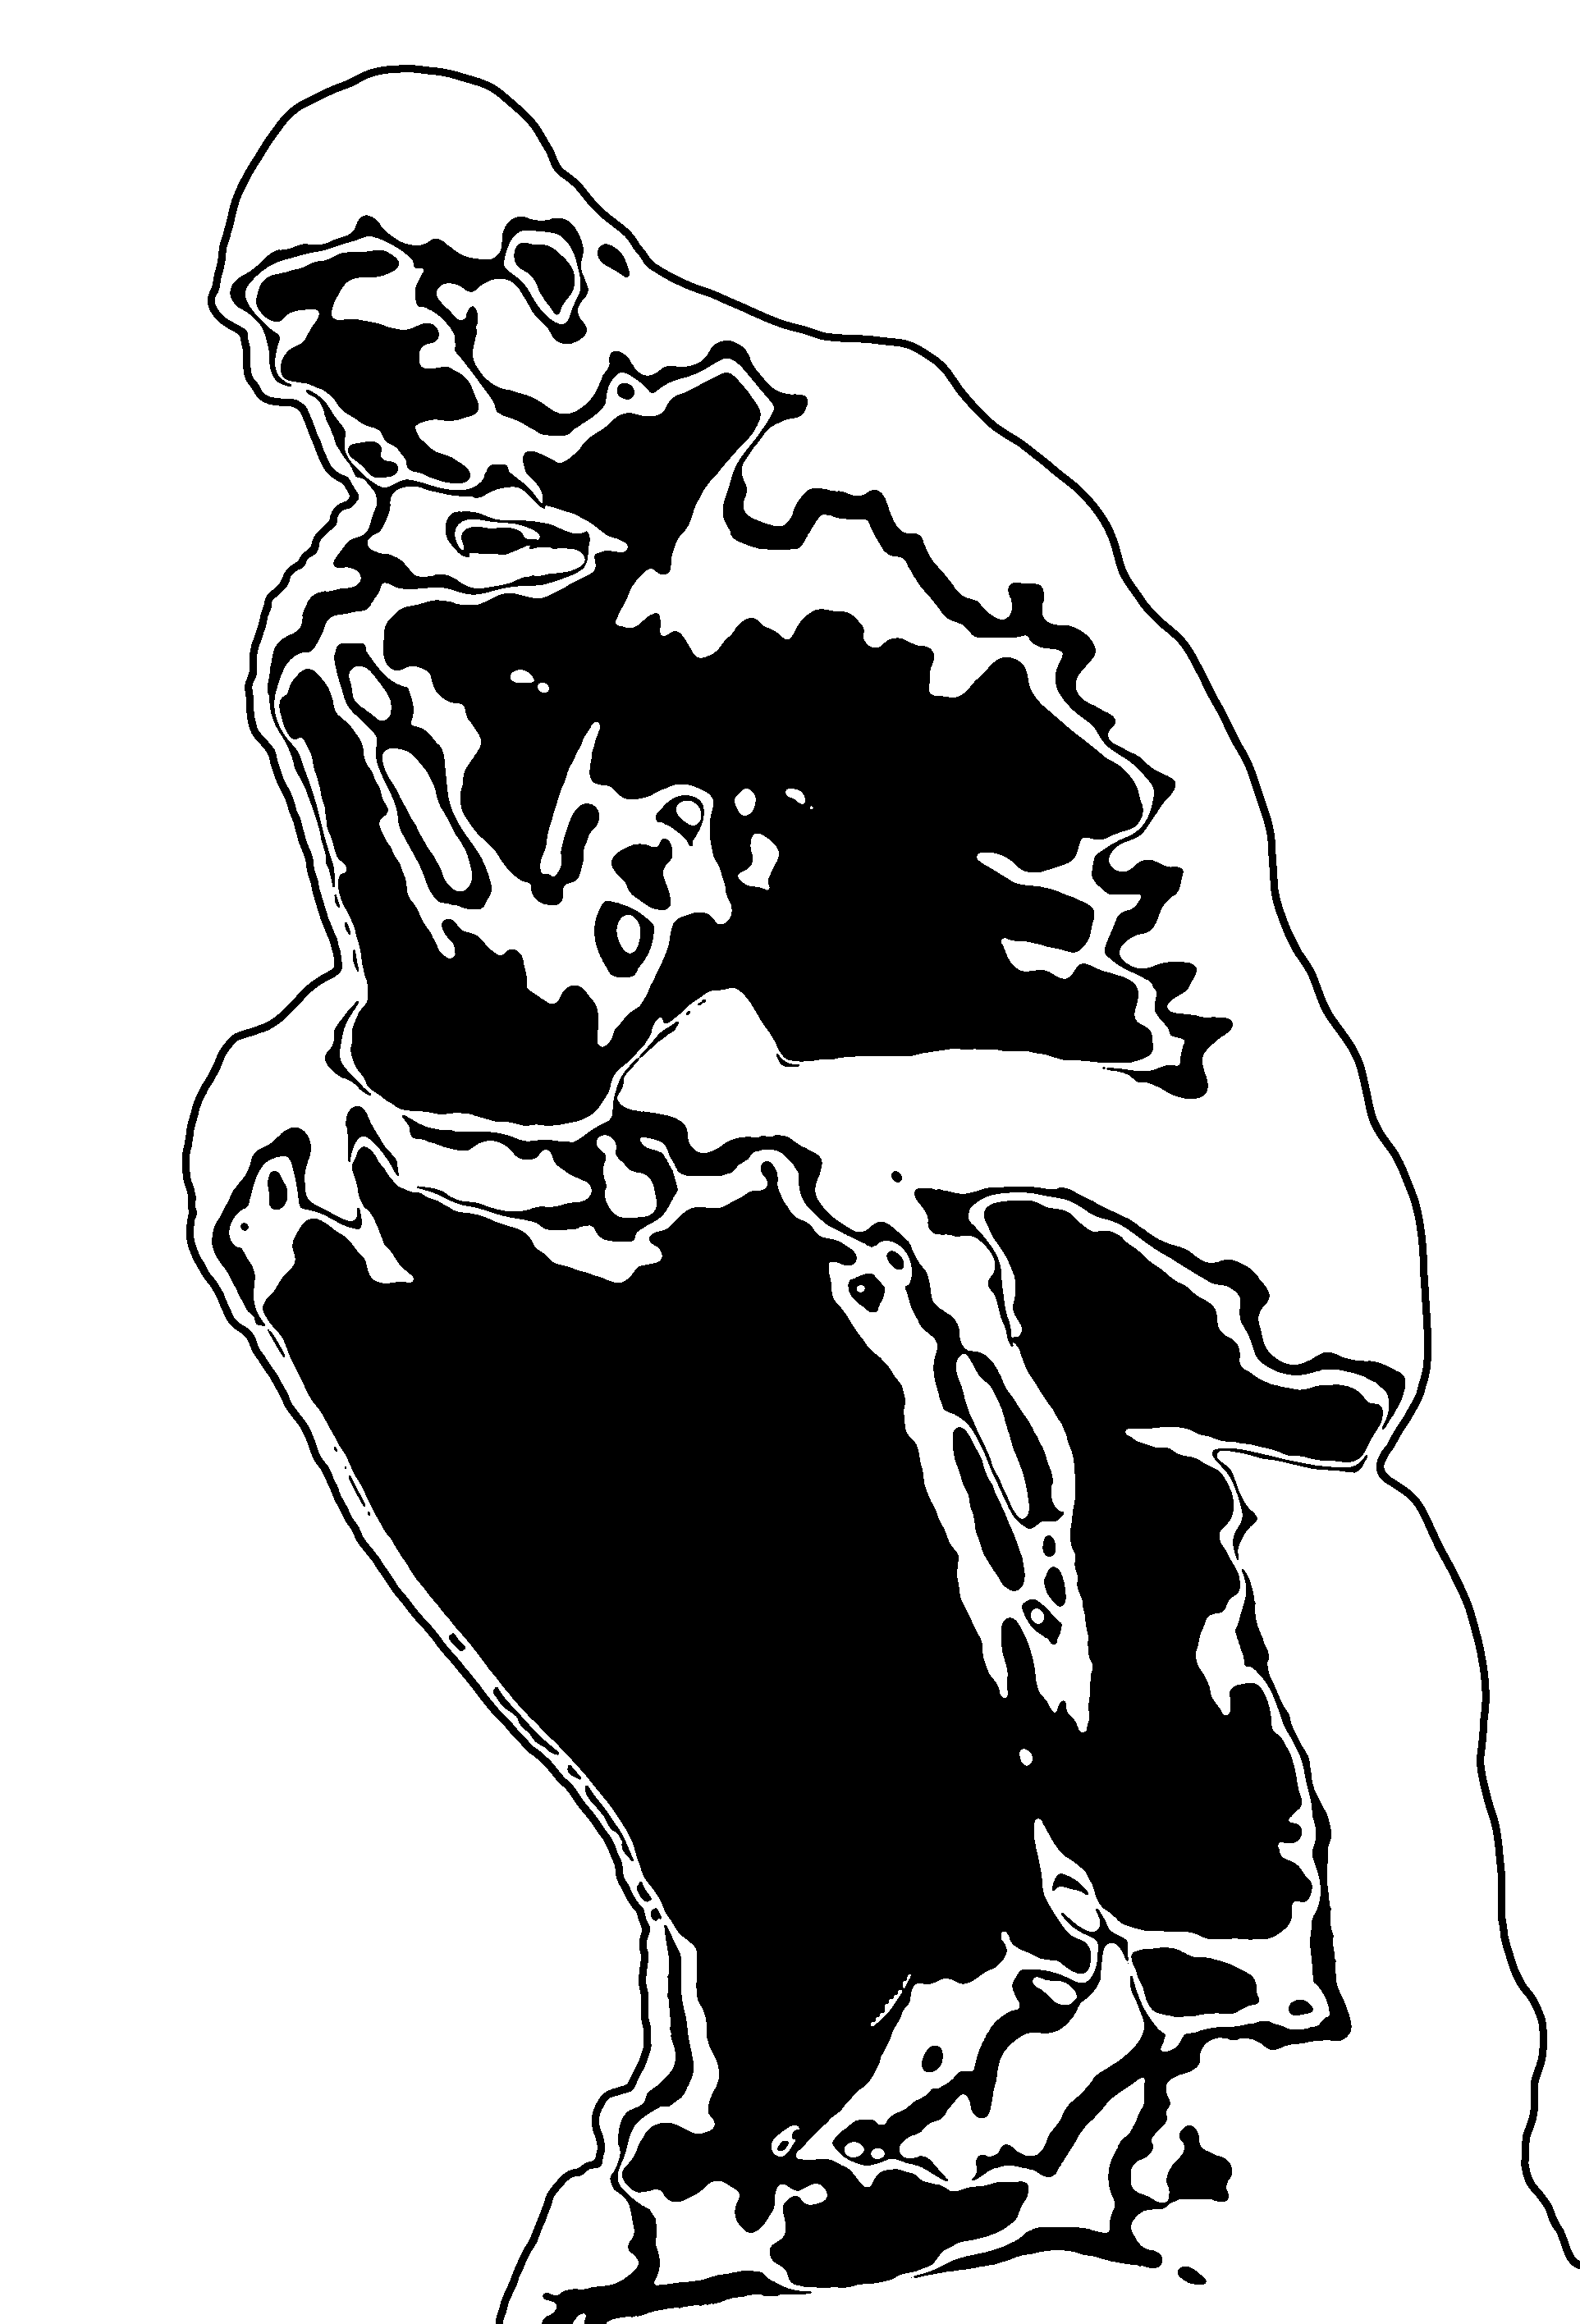 The Thinker Large Bw   Http   Www Wpclipart Com People Male Thinker